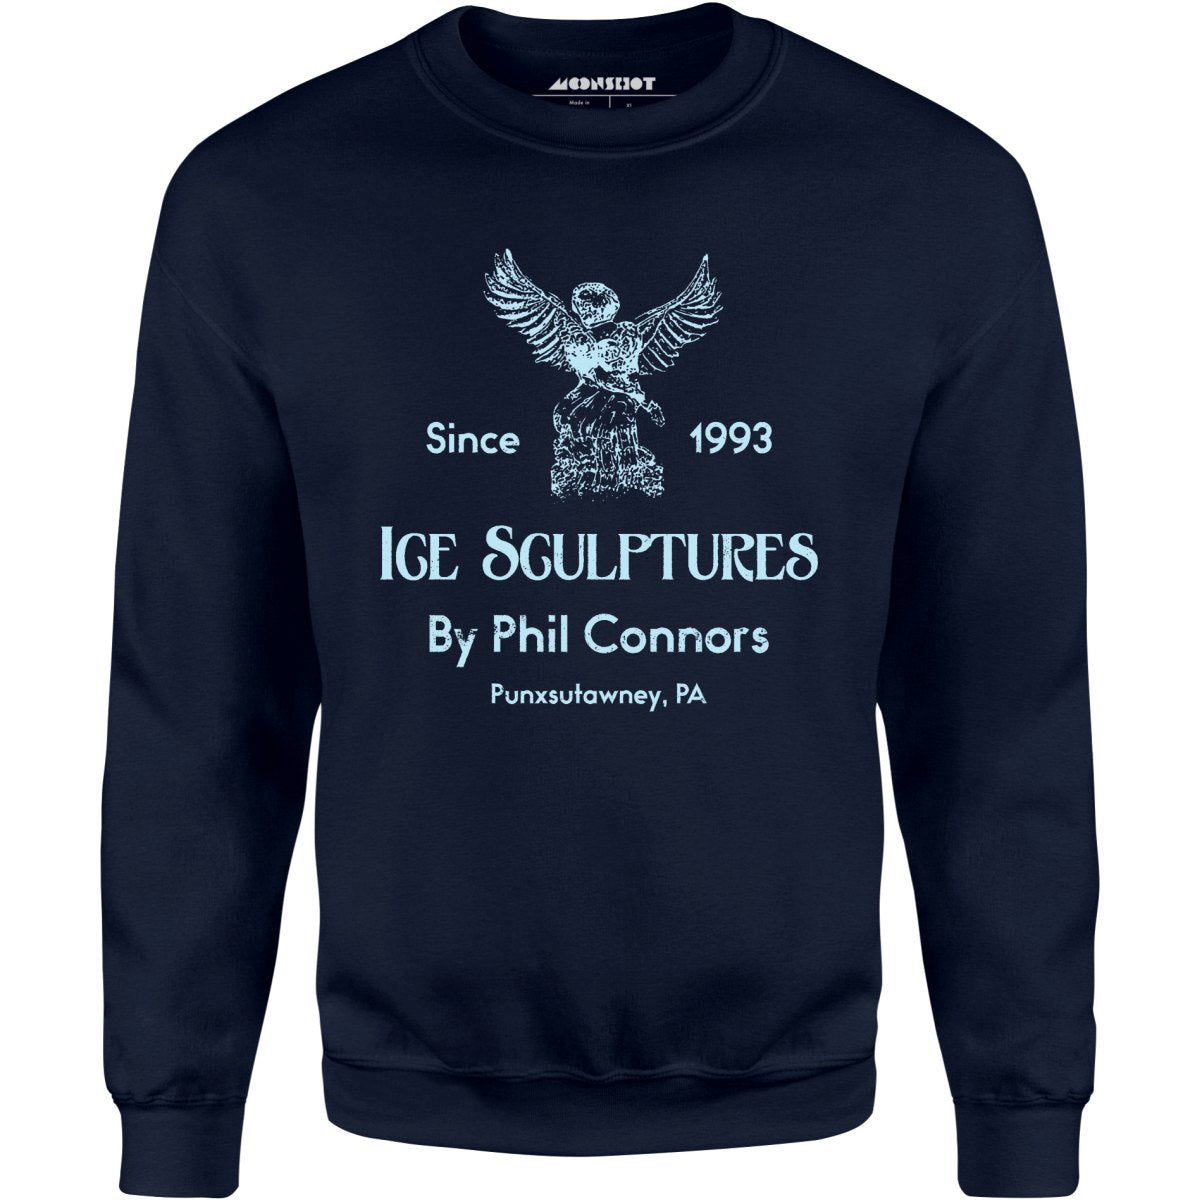 Ice Sculptures by Phil Connors - Groundhog Day - Unisex Sweatshirt